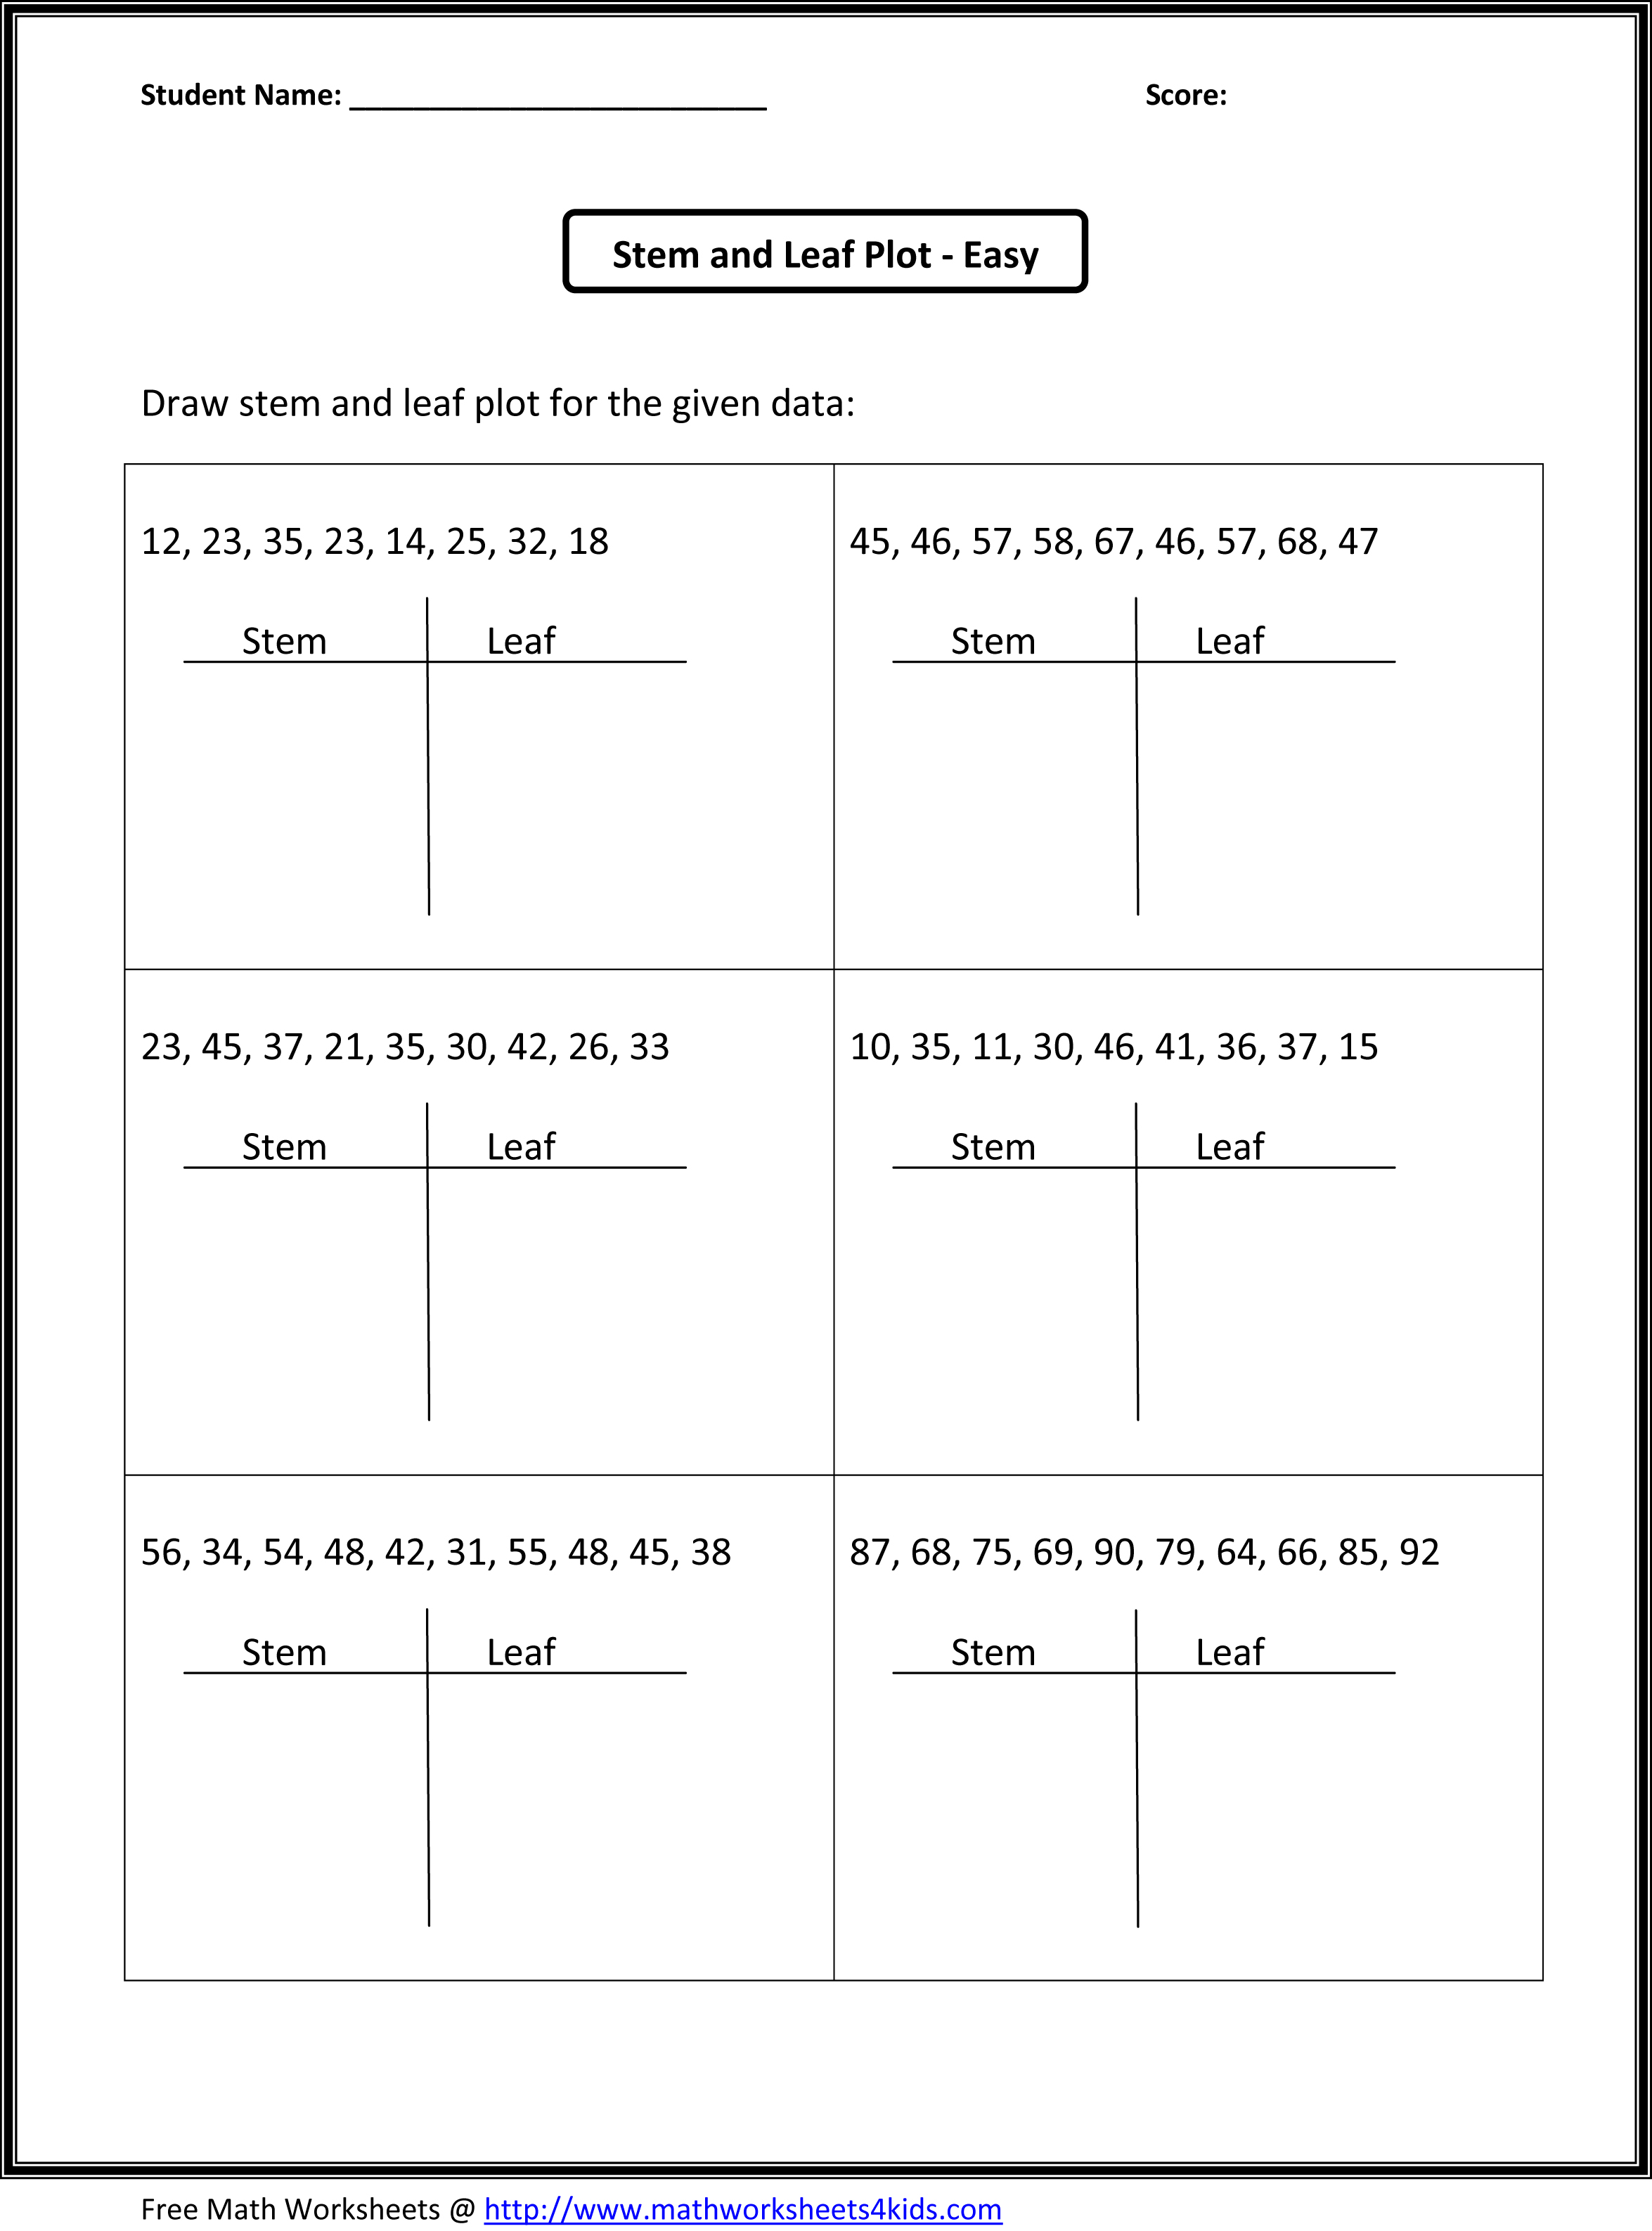 12 Best Images of Basic Information Worksheet - Stem and ... periodic table layout diagram 